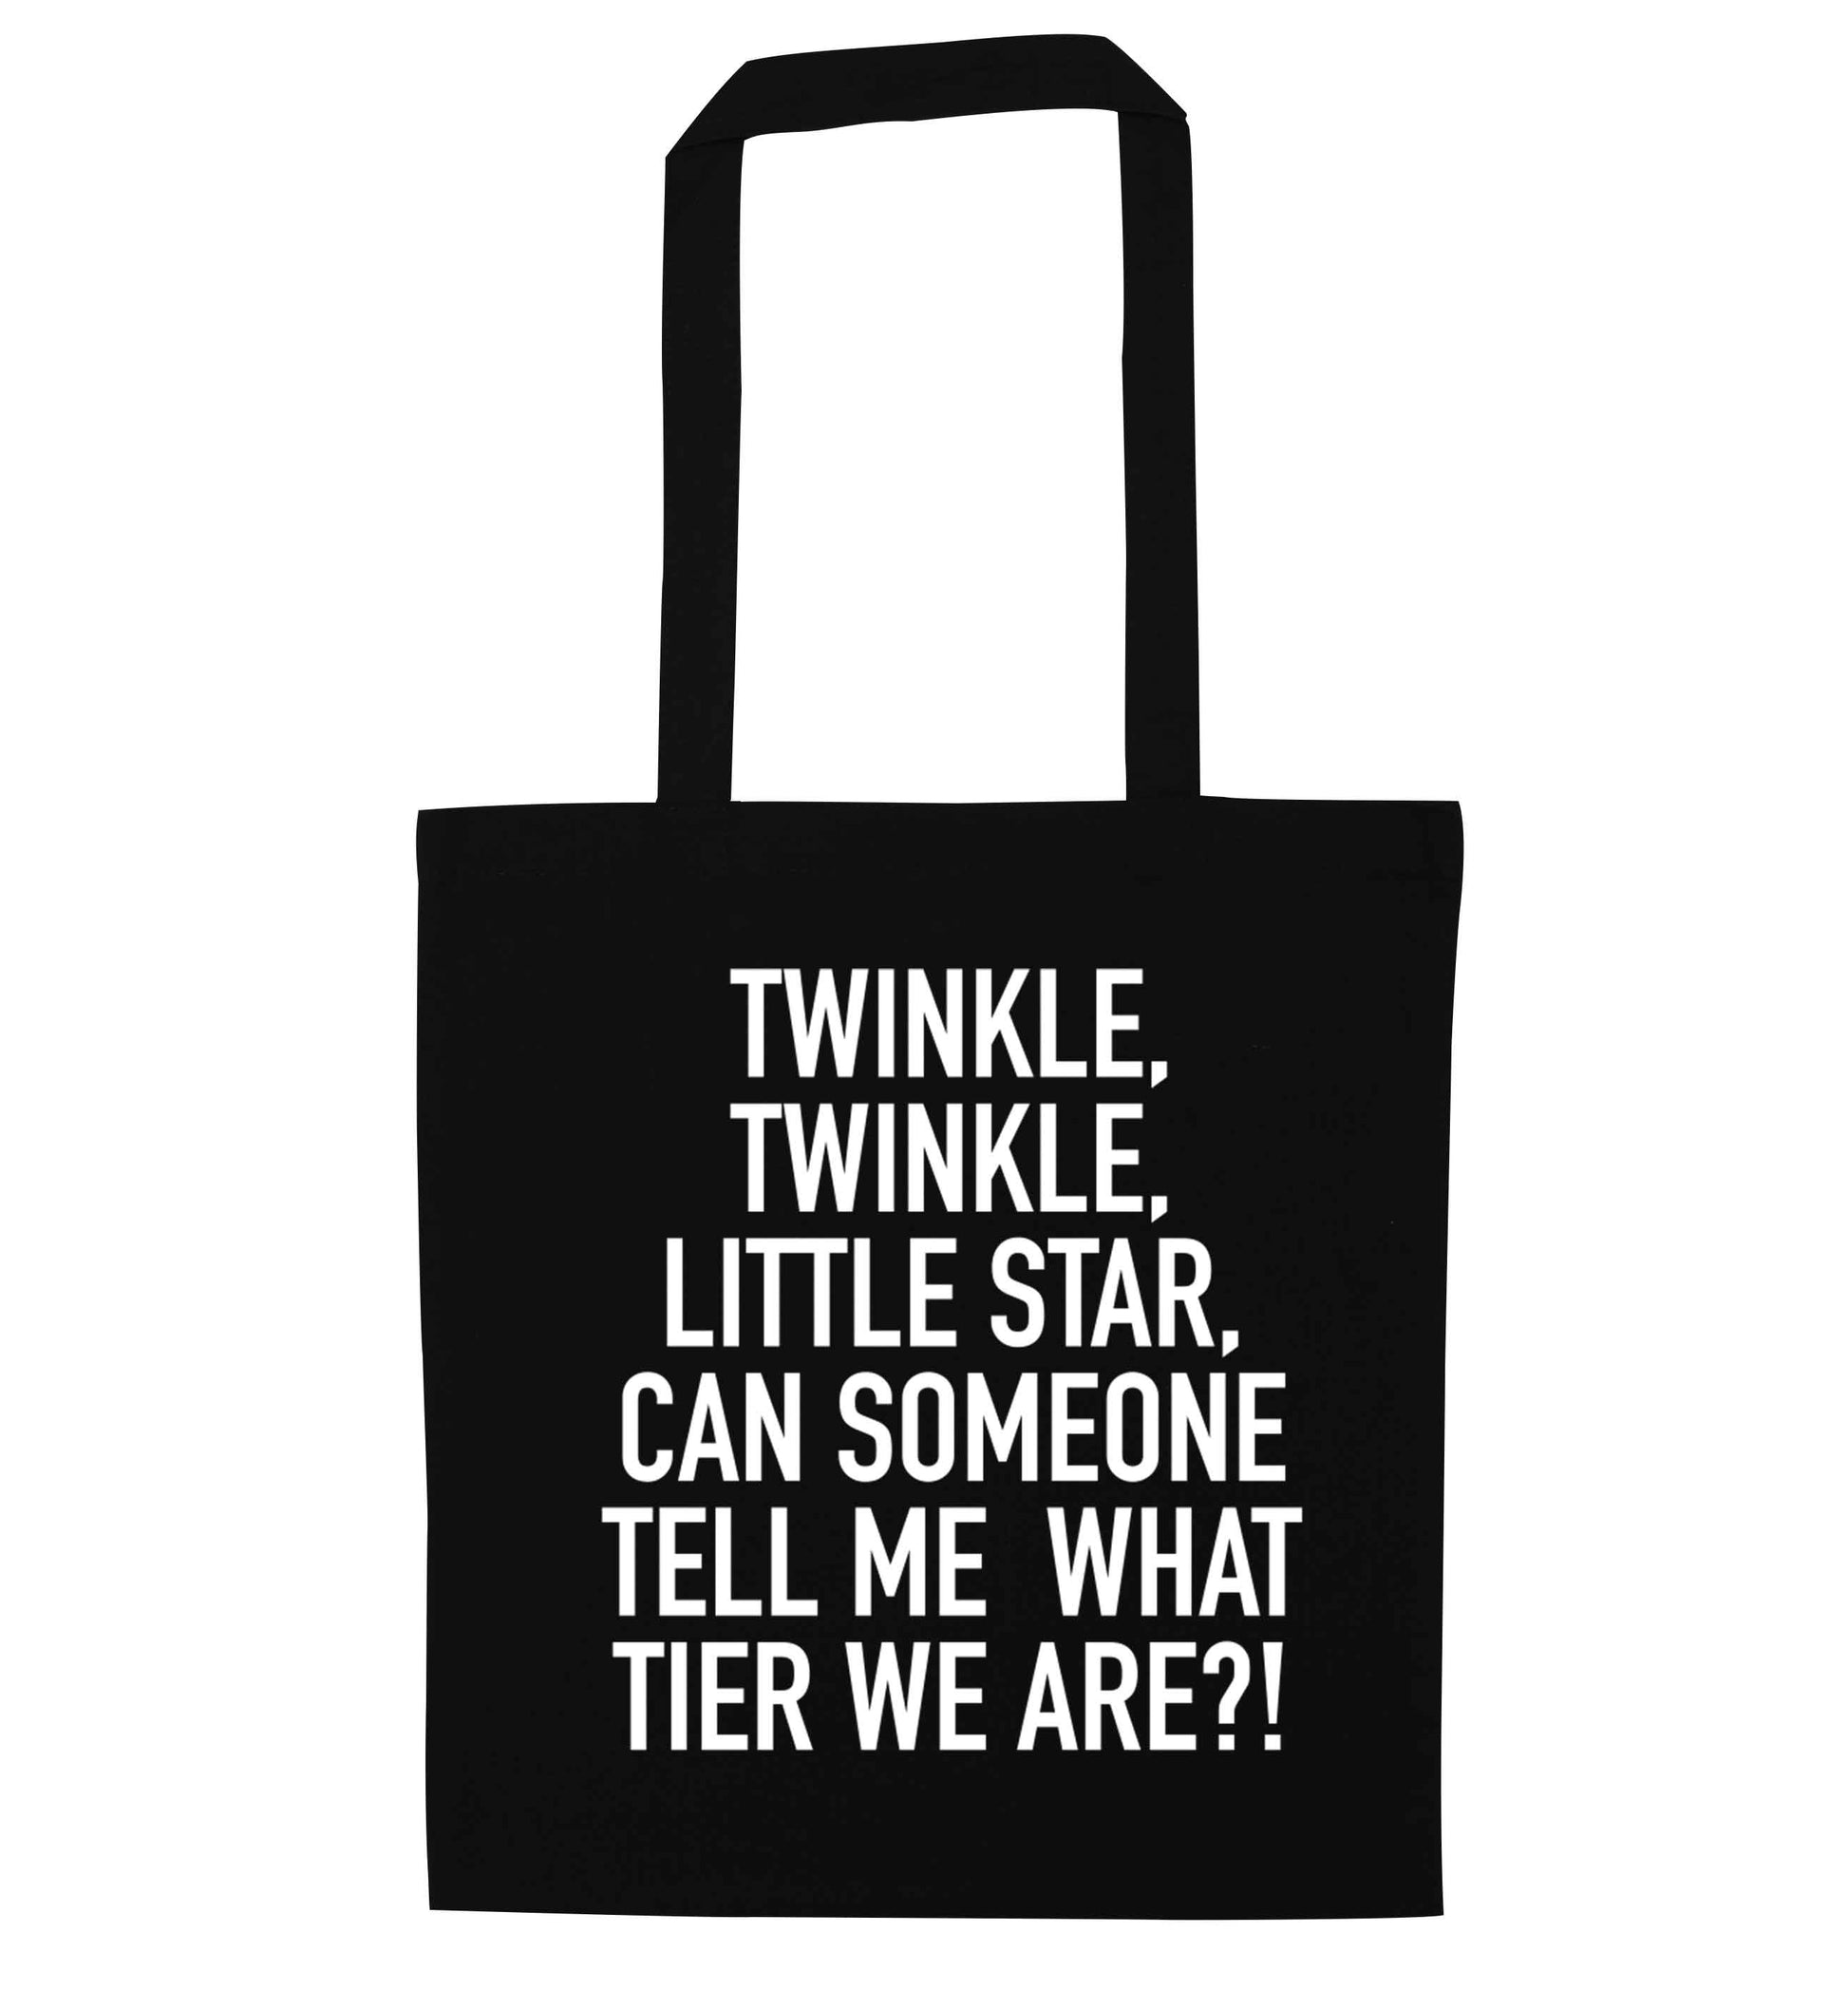 Twinkle twinkle, little star does anyone know what tier we are? black tote bag